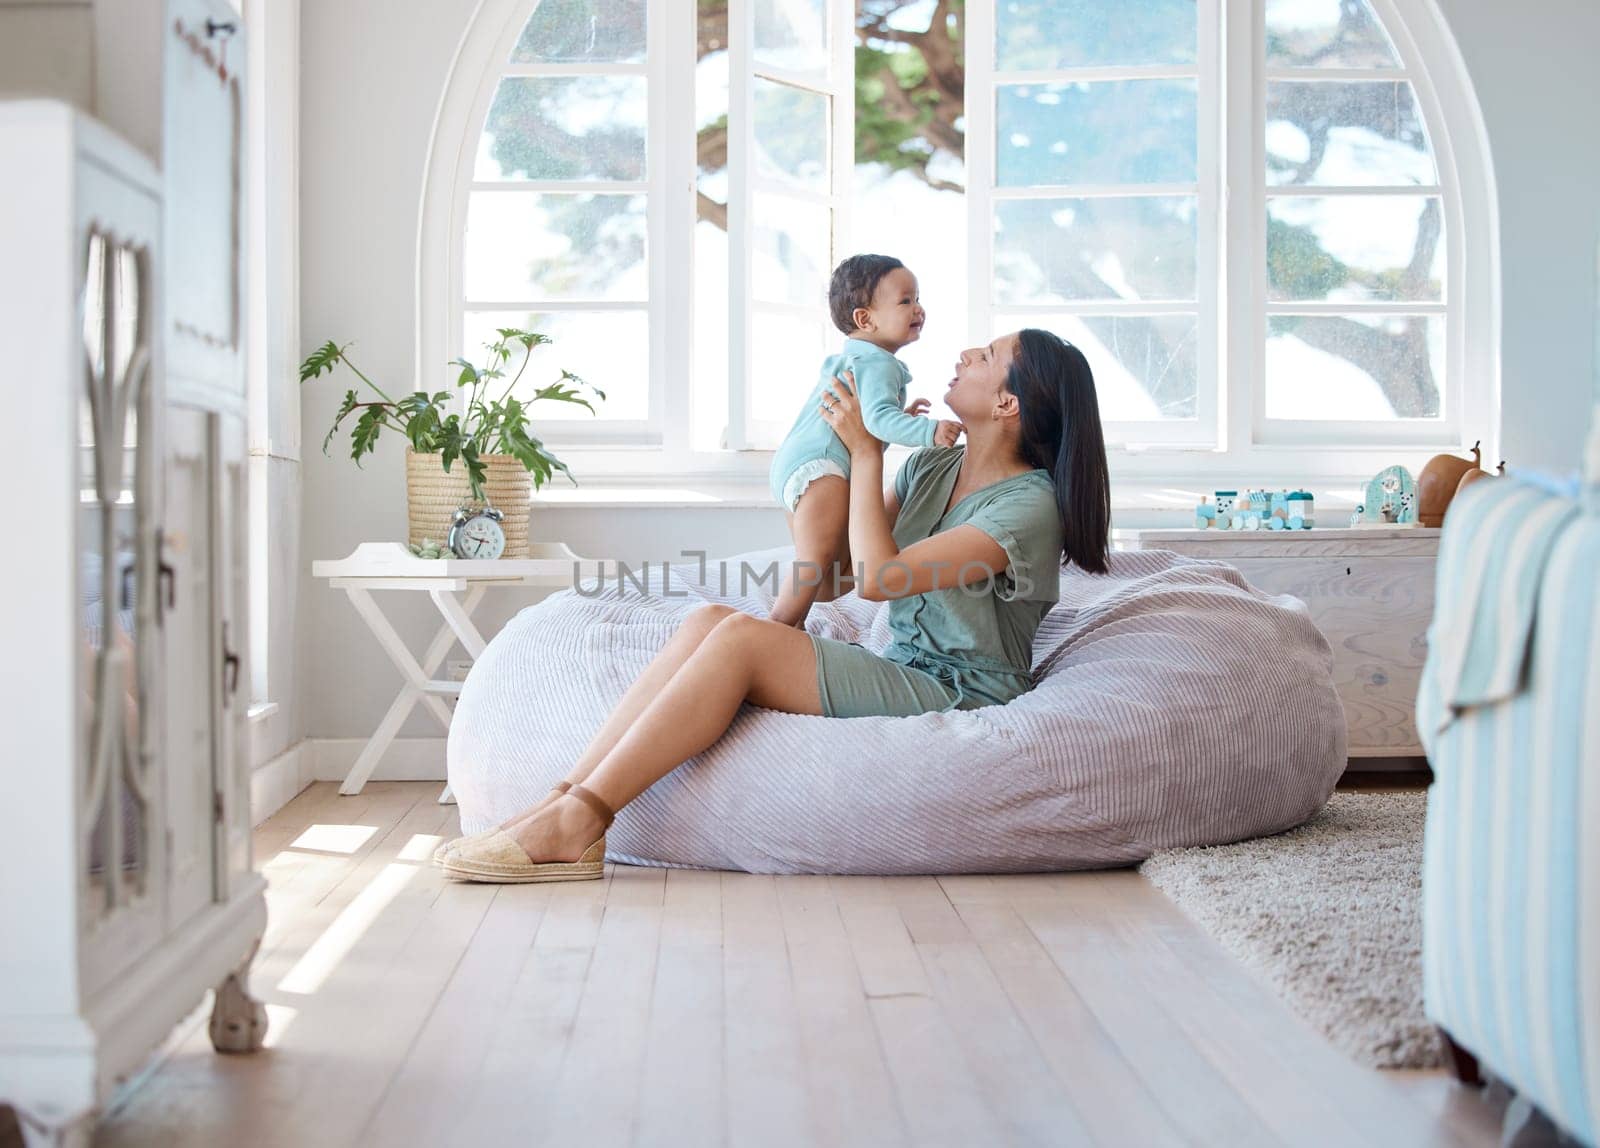 Home, mother and holding baby to relax on bean bag for love, care and quality time together in childhood development. Mom, infant and carrying newborn kid in living room for support, fun and comfort.